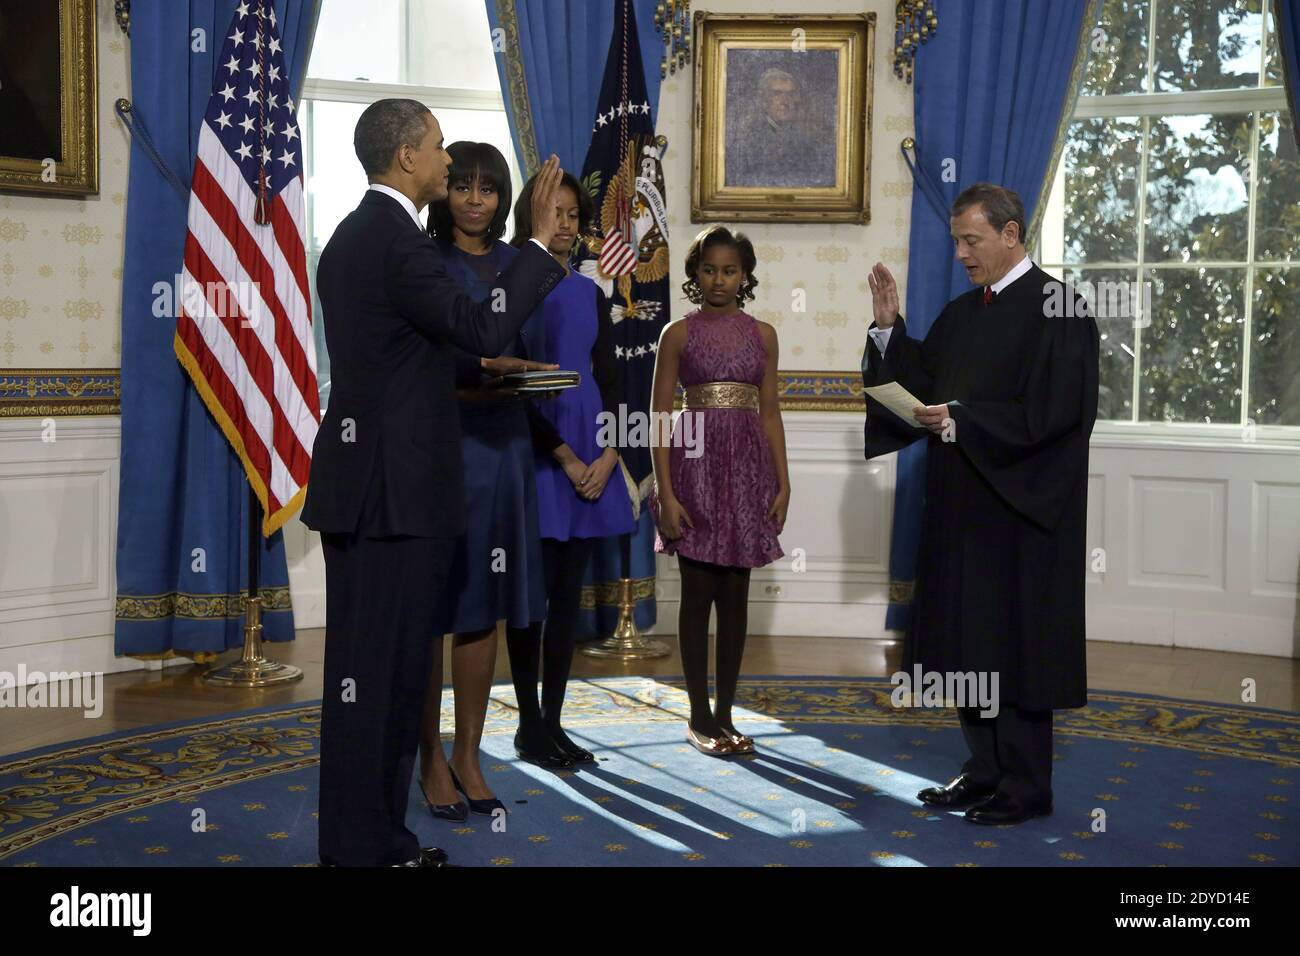 US Supreme Court Chief Justice John Roberts, Jr. administers the oath of office as US President Barack Obama is sworn in for a second term as President in the Blue Room of the White House January 20, 2013 in Washington, DC, USA. Obama was officially sworn in for his second term as the 44th President of the United States during the 57th Presidential Inauguration but will also participate in a ceremonial swearing in on Monday. Photo by Charles Dharapak/Pool/ABACAPTRESS.COM Stock Photo